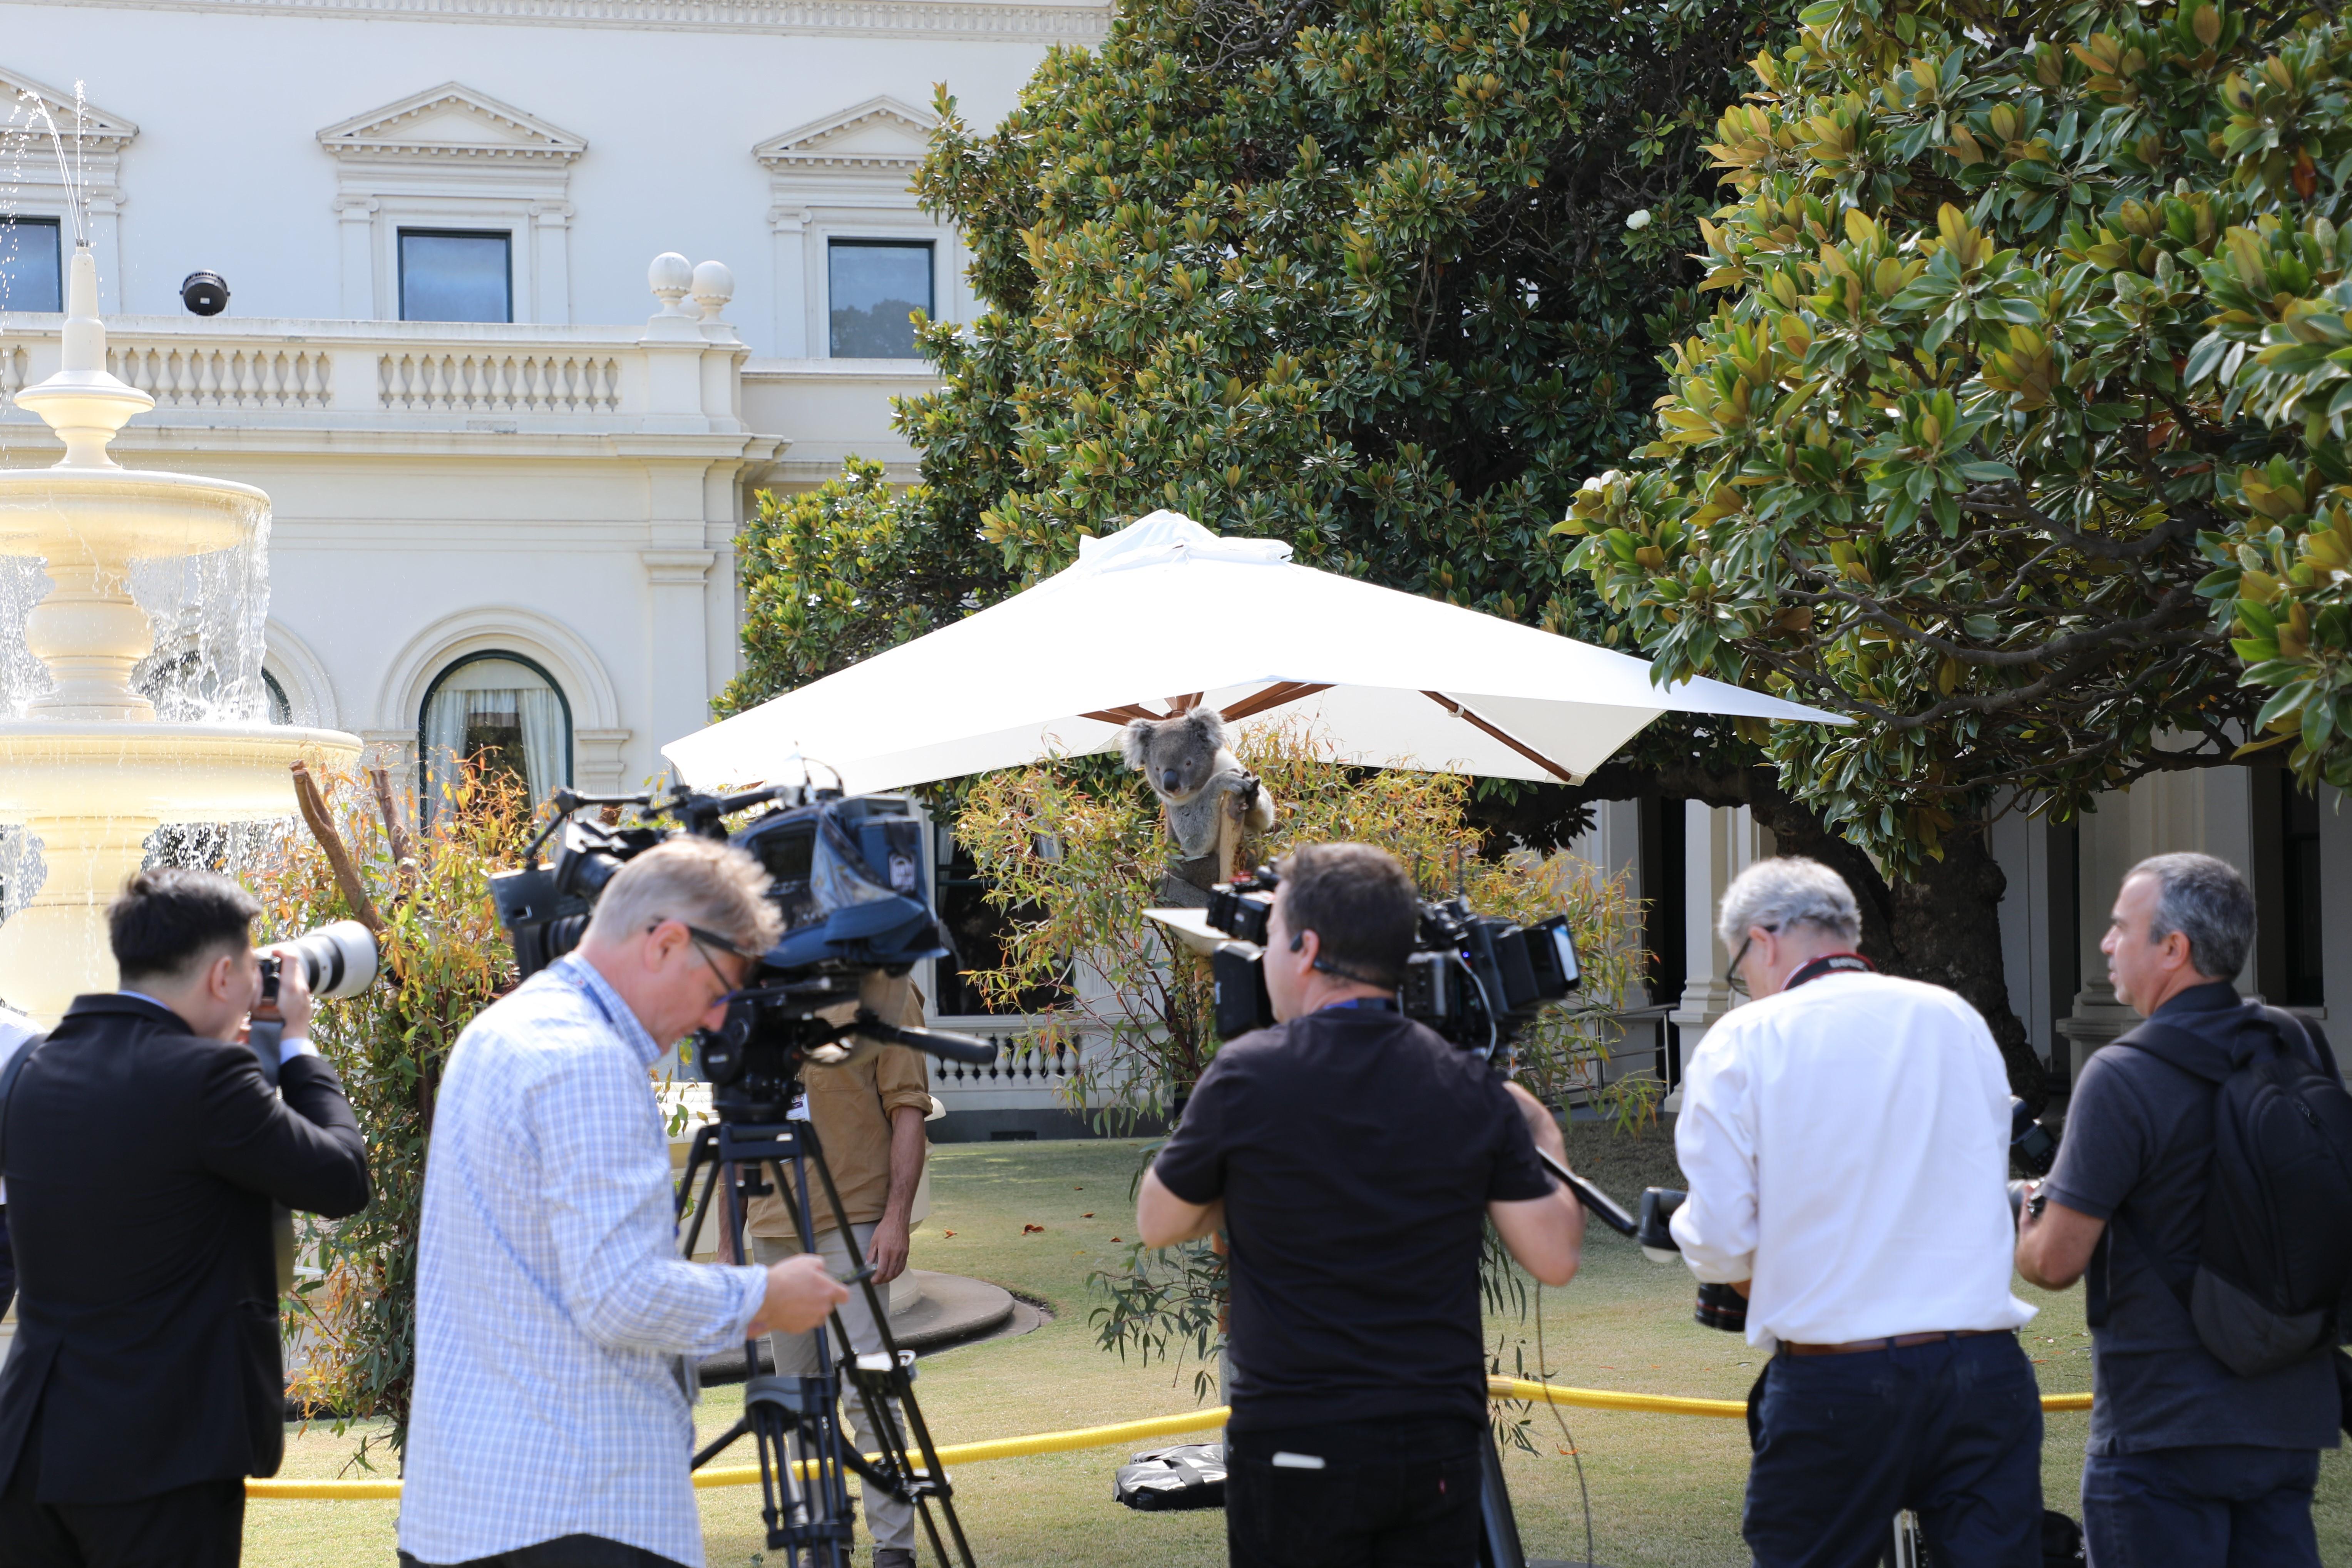 Media on the Fountain Court preparing to capture ASEAN Leader arrivals.  